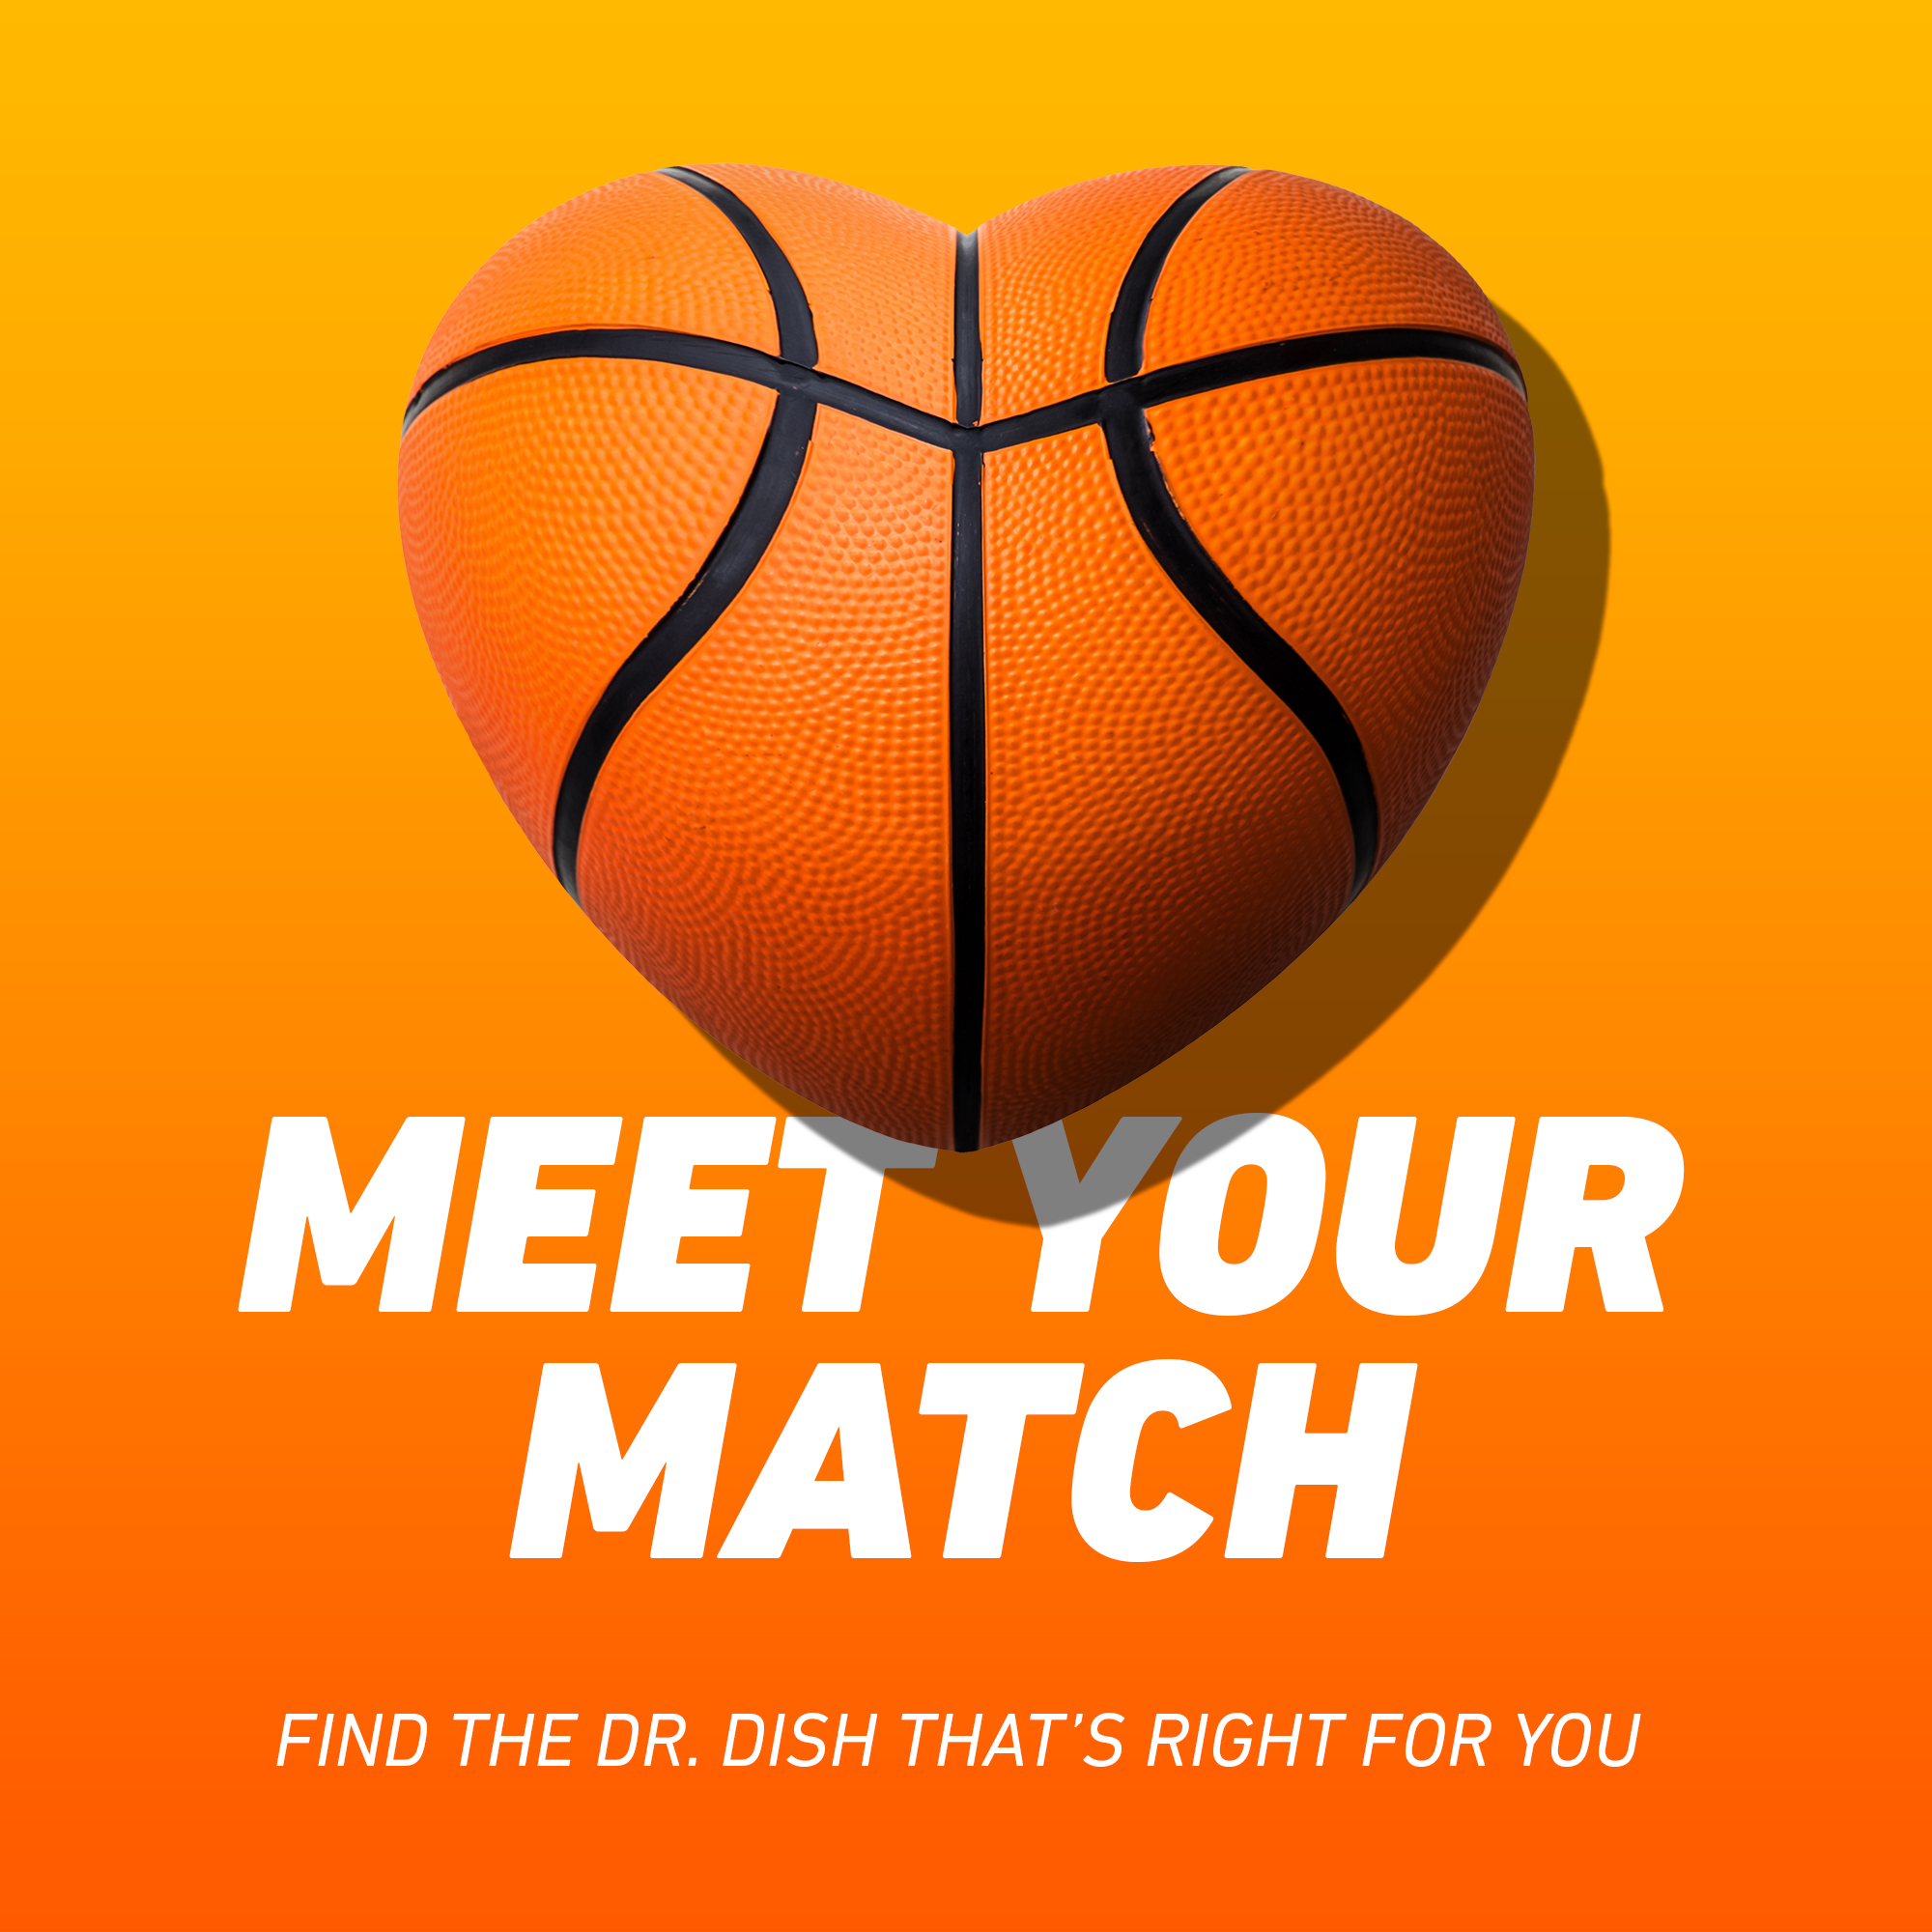 Meet your Basketball Training Match this Valentine's Day